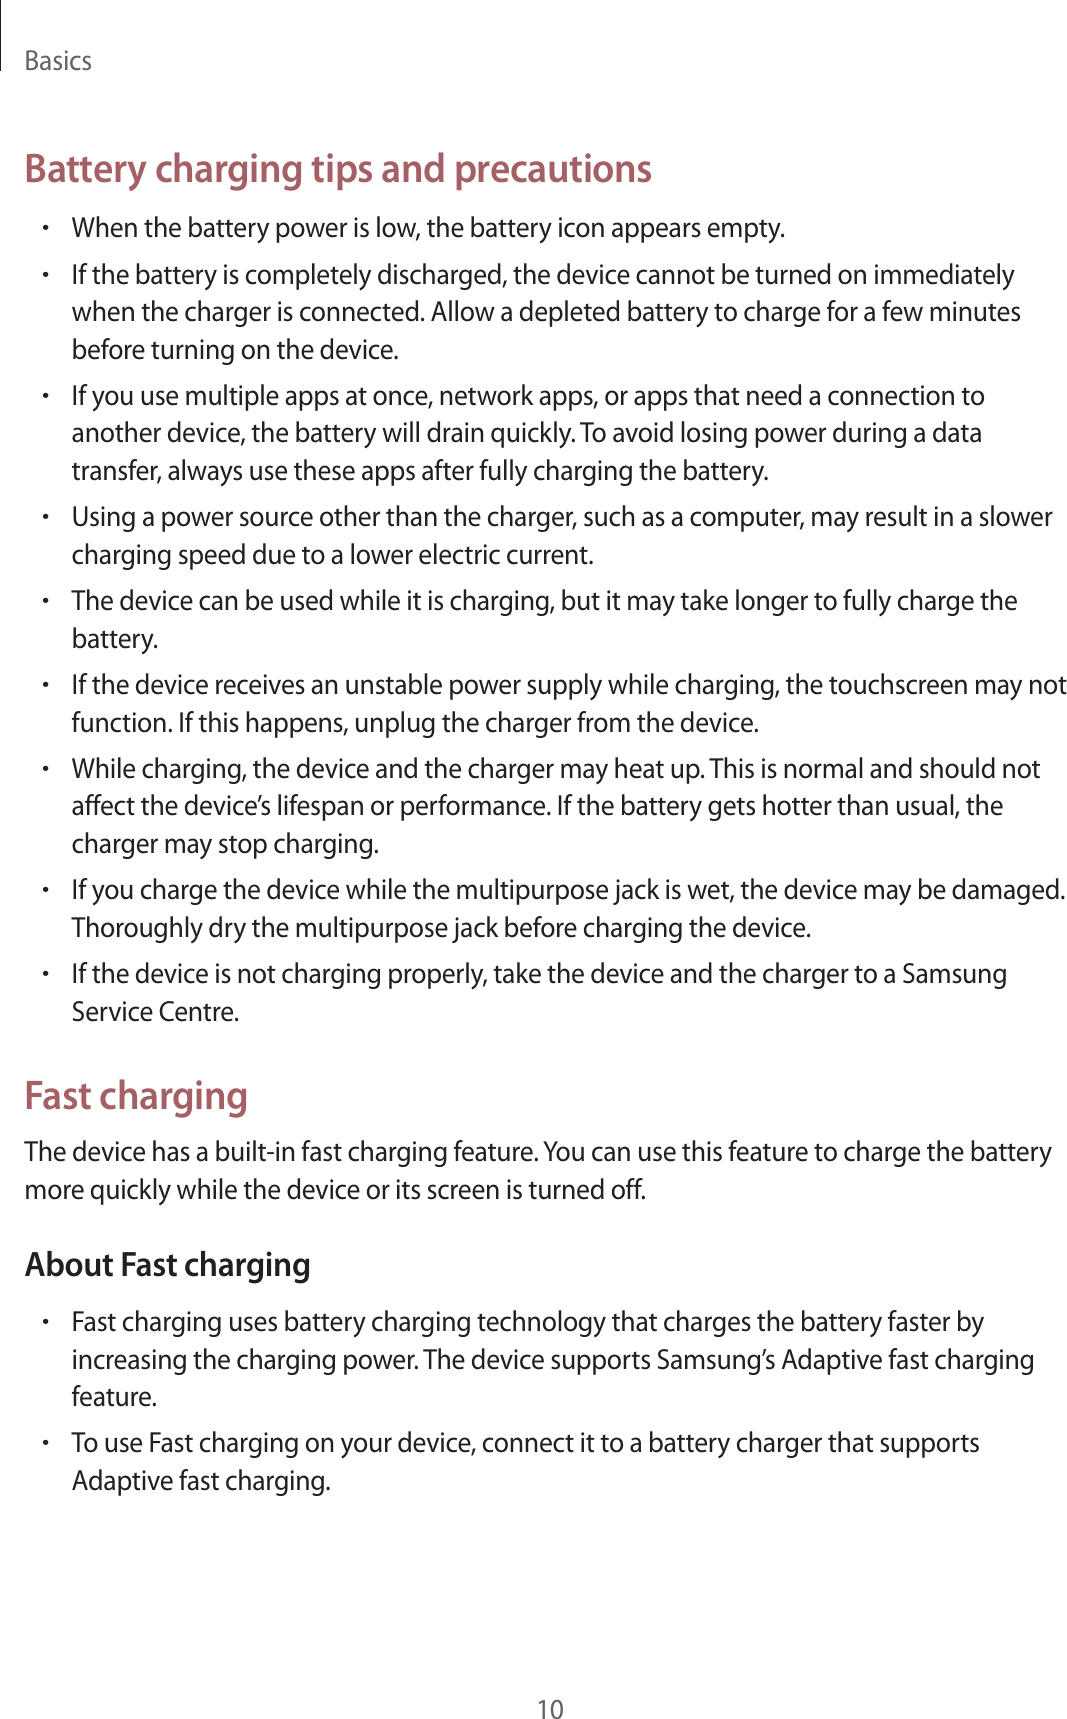 Basics10Battery charging tips and precautions•When the battery power is low, the battery icon appears empty.•If the battery is completely discharged, the device cannot be turned on immediately when the charger is connected. Allow a depleted battery to charge for a few minutes before turning on the device.•If you use multiple apps at once, network apps, or apps that need a connection to another device, the battery will drain quickly. To avoid losing power during a data transfer, always use these apps after fully charging the battery.•Using a power source other than the charger, such as a computer, may result in a slower charging speed due to a lower electric current.•The device can be used while it is charging, but it may take longer to fully charge the battery.•If the device receives an unstable power supply while charging, the touchscreen may not function. If this happens, unplug the charger from the device.•While charging, the device and the charger may heat up. This is normal and should not affect the device’s lifespan or performance. If the battery gets hotter than usual, the charger may stop charging.•If you charge the device while the multipurpose jack is wet, the device may be damaged. Thoroughly dry the multipurpose jack before charging the device.•If the device is not charging properly, take the device and the charger to a Samsung Service Centre.Fast chargingThe device has a built-in fast charging feature. You can use this feature to charge the battery more quickly while the device or its screen is turned off.About Fast charging•Fast charging uses battery charging technology that charges the battery faster by increasing the charging power. The device supports Samsung’s Adaptive fast charging feature.•To use Fast charging on your device, connect it to a battery charger that supports Adaptive fast charging.